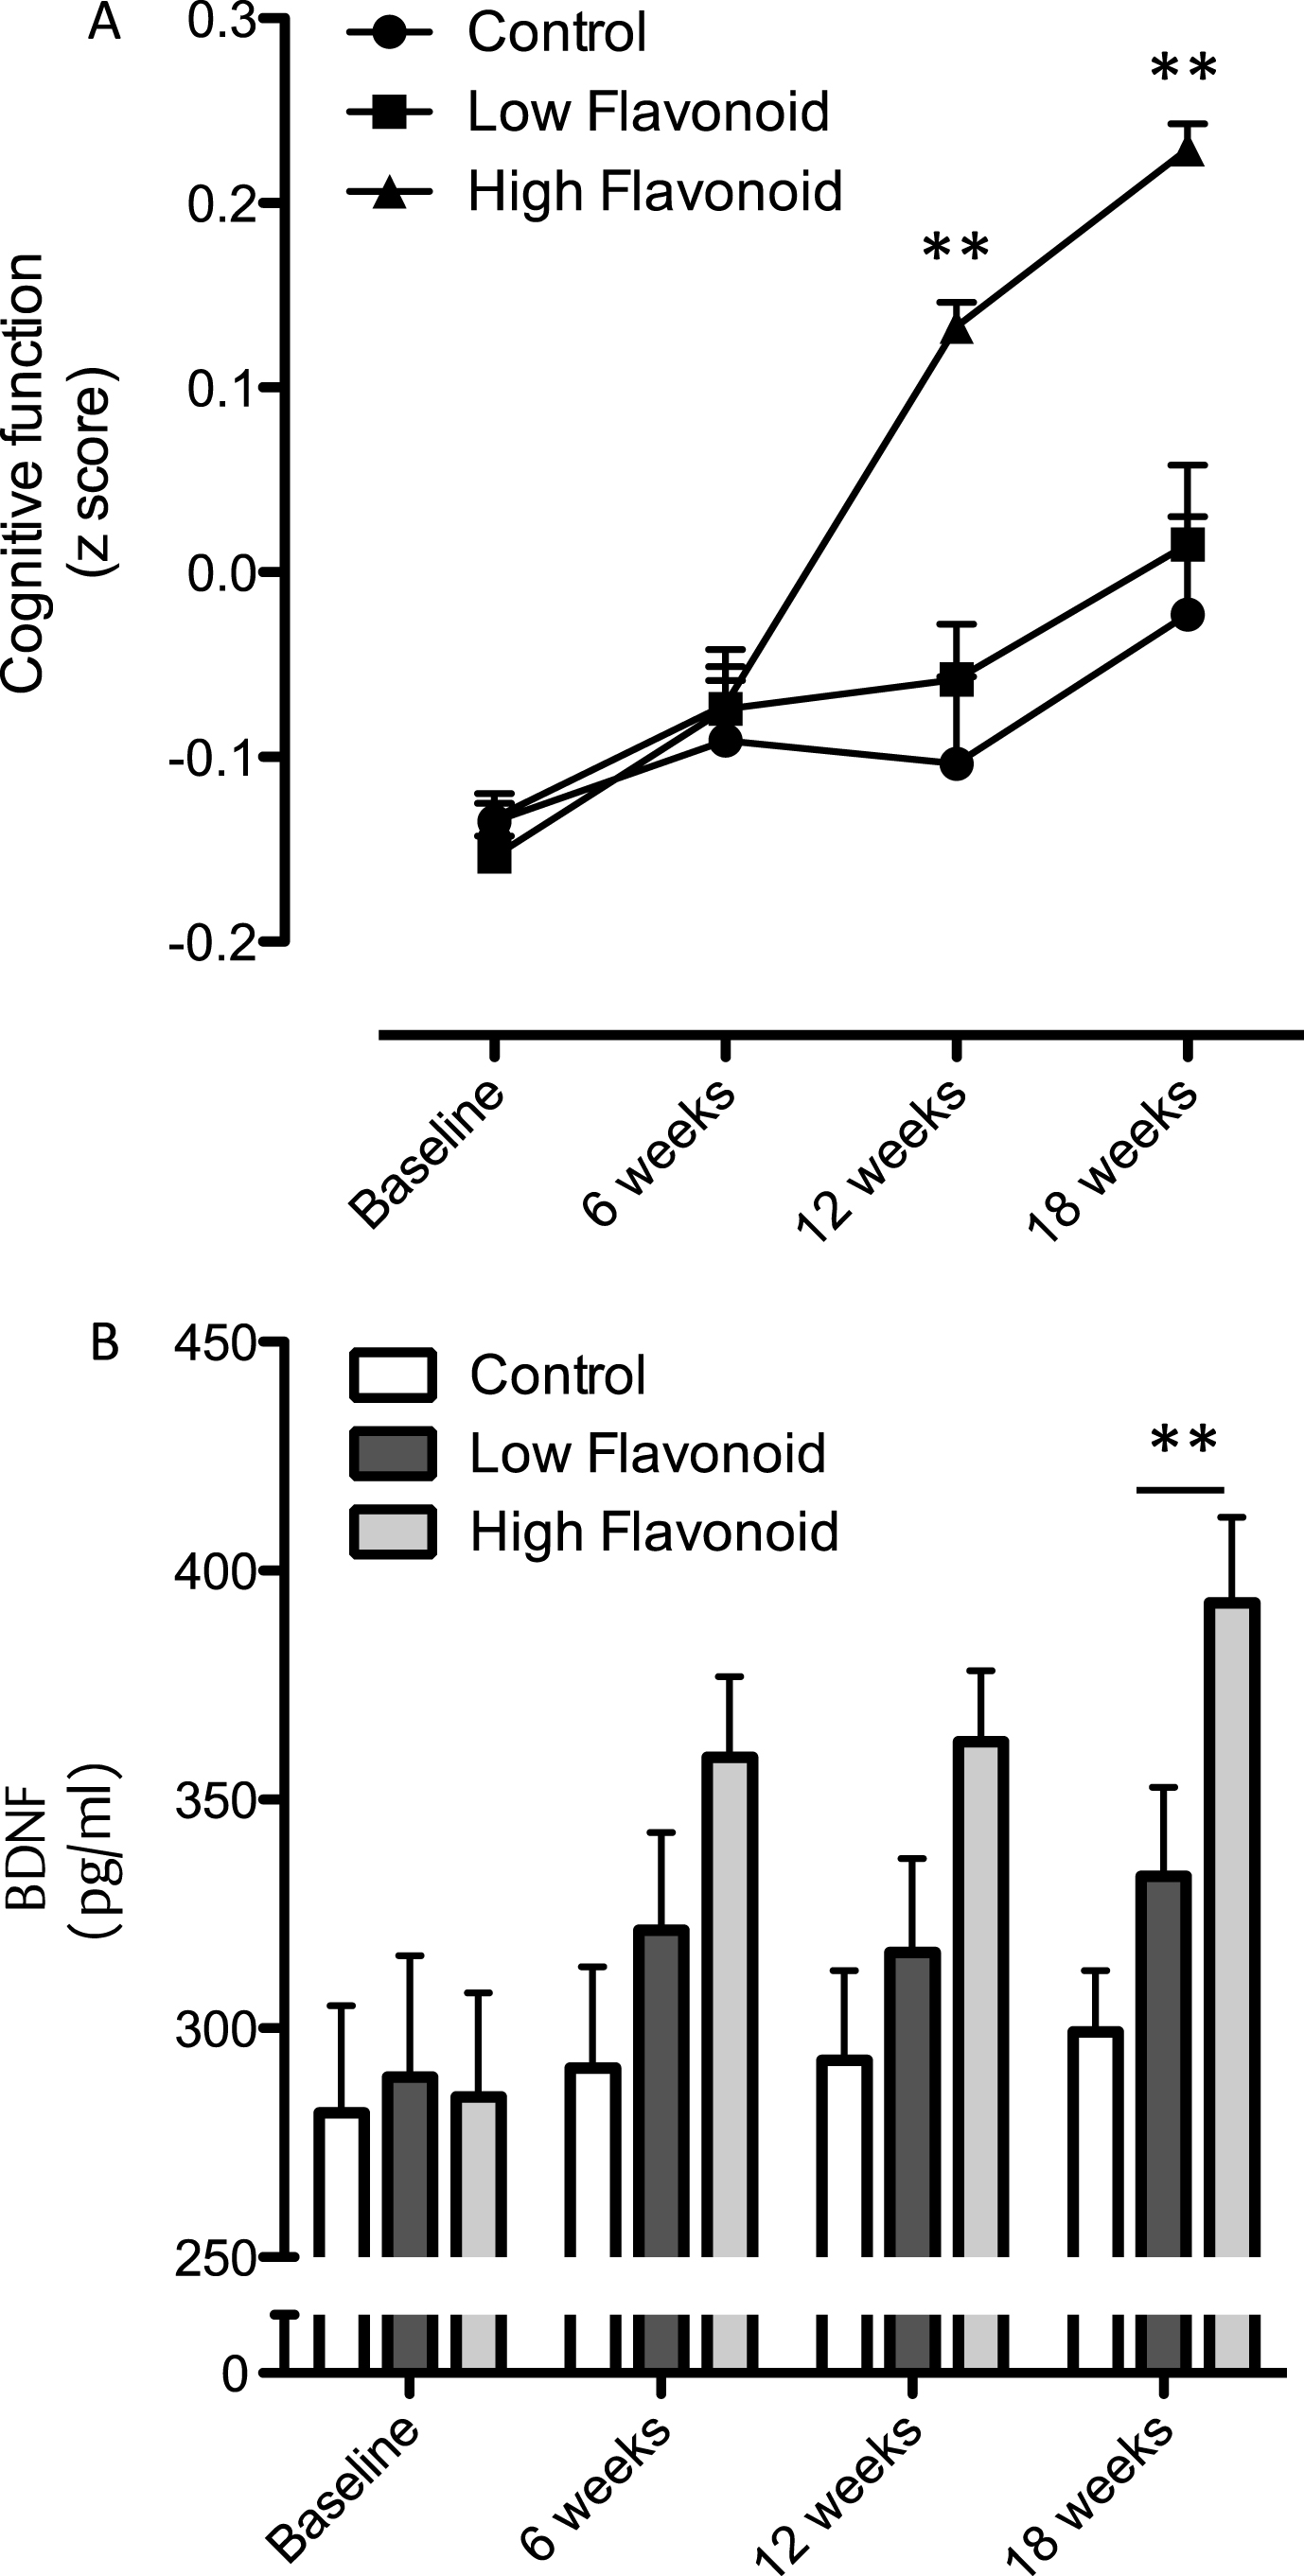 Influence of fruit and vegetable intake on 
cognition and BDNF. (A) Time-course of changes in cognitive function following consumption of high flavonoid 
F&Vs; low flavonoid F&Vs; and after following habitual diet (Control). Data were analyzed using two-way 
repeated measures ANOVA with time and treatment as the two factors (significant effect of time 
(p = 0.003), treatment (p = 0.069) and an interaction (p = 0.033) between dietary 
intake and cognitive performance. Post hoc analysis, (Bonferroni) indicated significantly greater 
cognitive performance at both 8 (***p < 0.001) and 12 weeks 
(**p < 0.01), relative to both habitual diet (control) and LF F&V intake. (B) Impact of 
fruit and vegetable intake on serum BDNF levels. A two way ANOVA with repeated measures indicated significant 
time (p = 0.008), treatment (P < 0.005) and an interaction (p = 0.026) between serum 
BDNF and dietary intake across the 12 weeks. Post hoc analysis indicated a significantly higher serum BDNF 
level at 12 weeks in the HF F&V group, relative to the habitual diet (control) group 
(**p < 0.001). Details of the high and low classification of F&V are outlined in the 
Materials and Methods section. All data are plotted as mean values±SEM (n = 112).